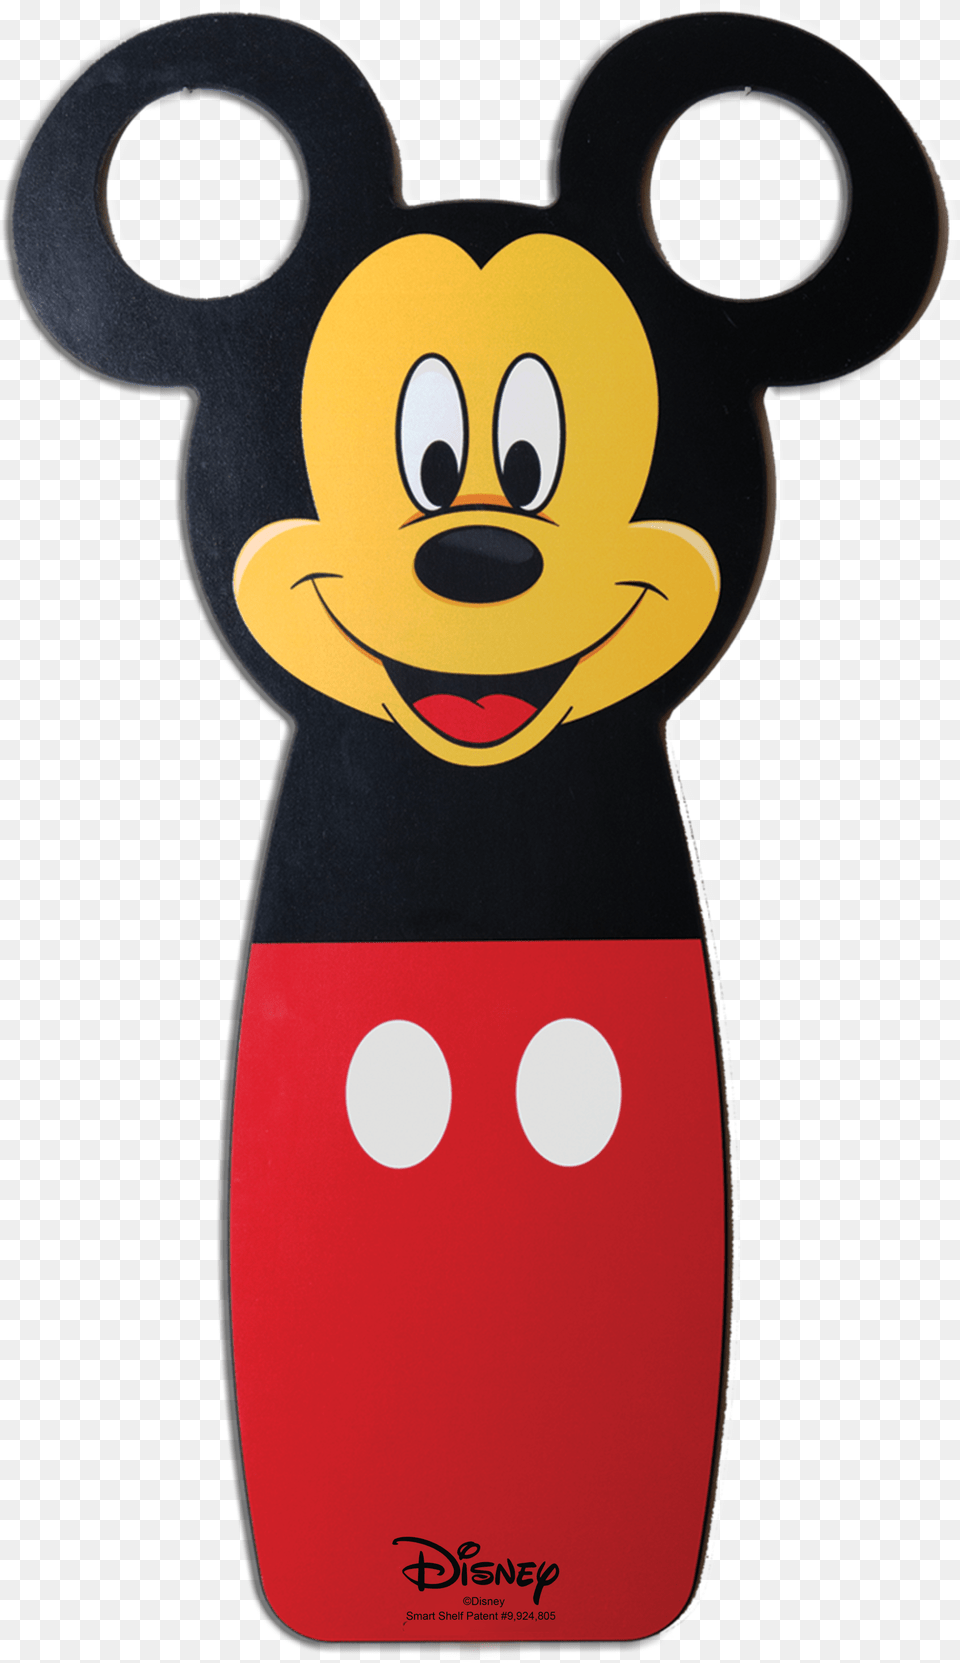 Mickey Mouse Is Recognized As A Worldwide Symbol Of Mickey Mouse Free Transparent Png